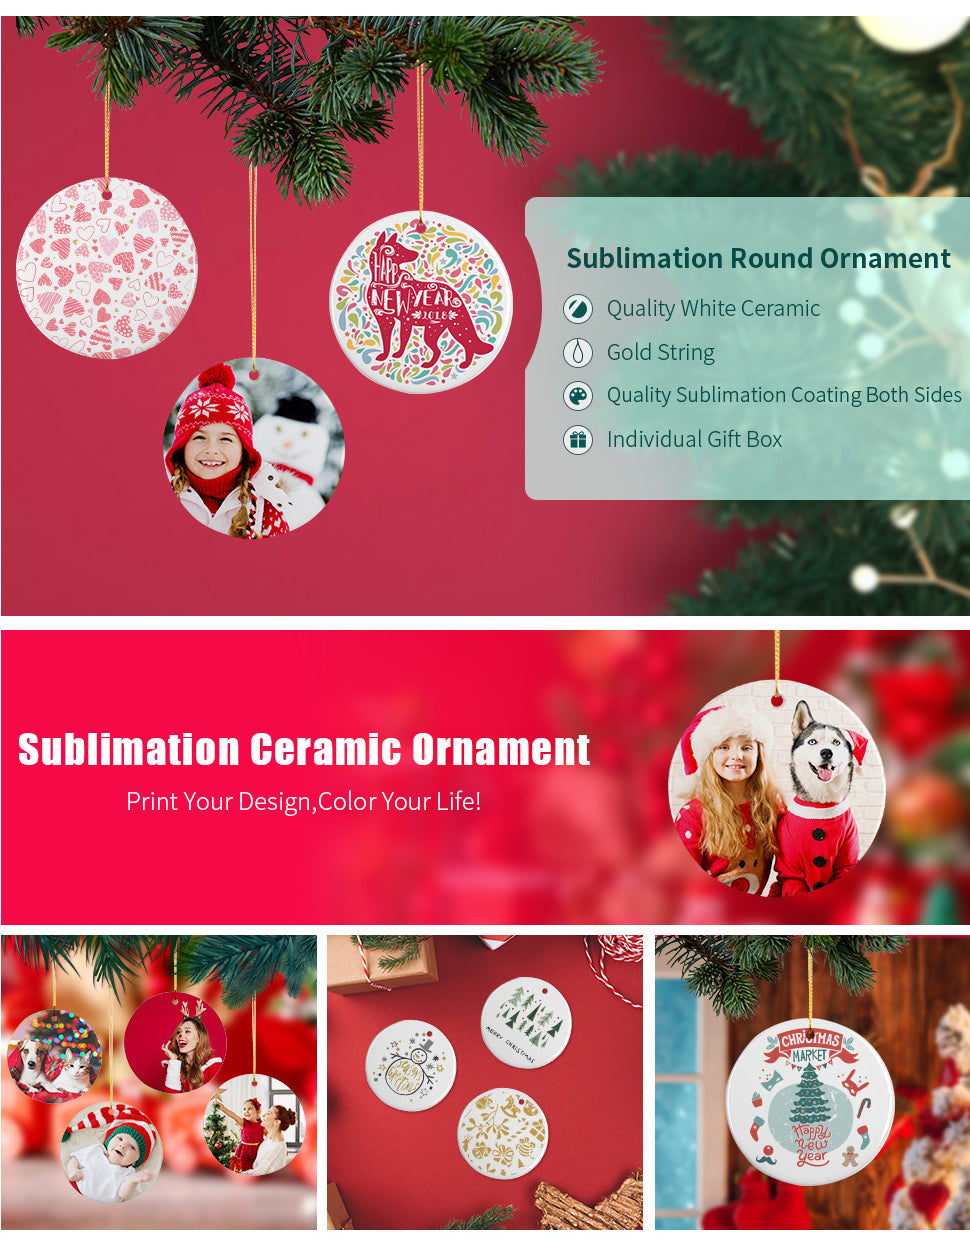 D-groee 1 Set Sublimation Ceramic Ornament Bulk White 2.87 inch Round Blank Ornament with Gold String for Crafting DIY Personalized Christmas Home